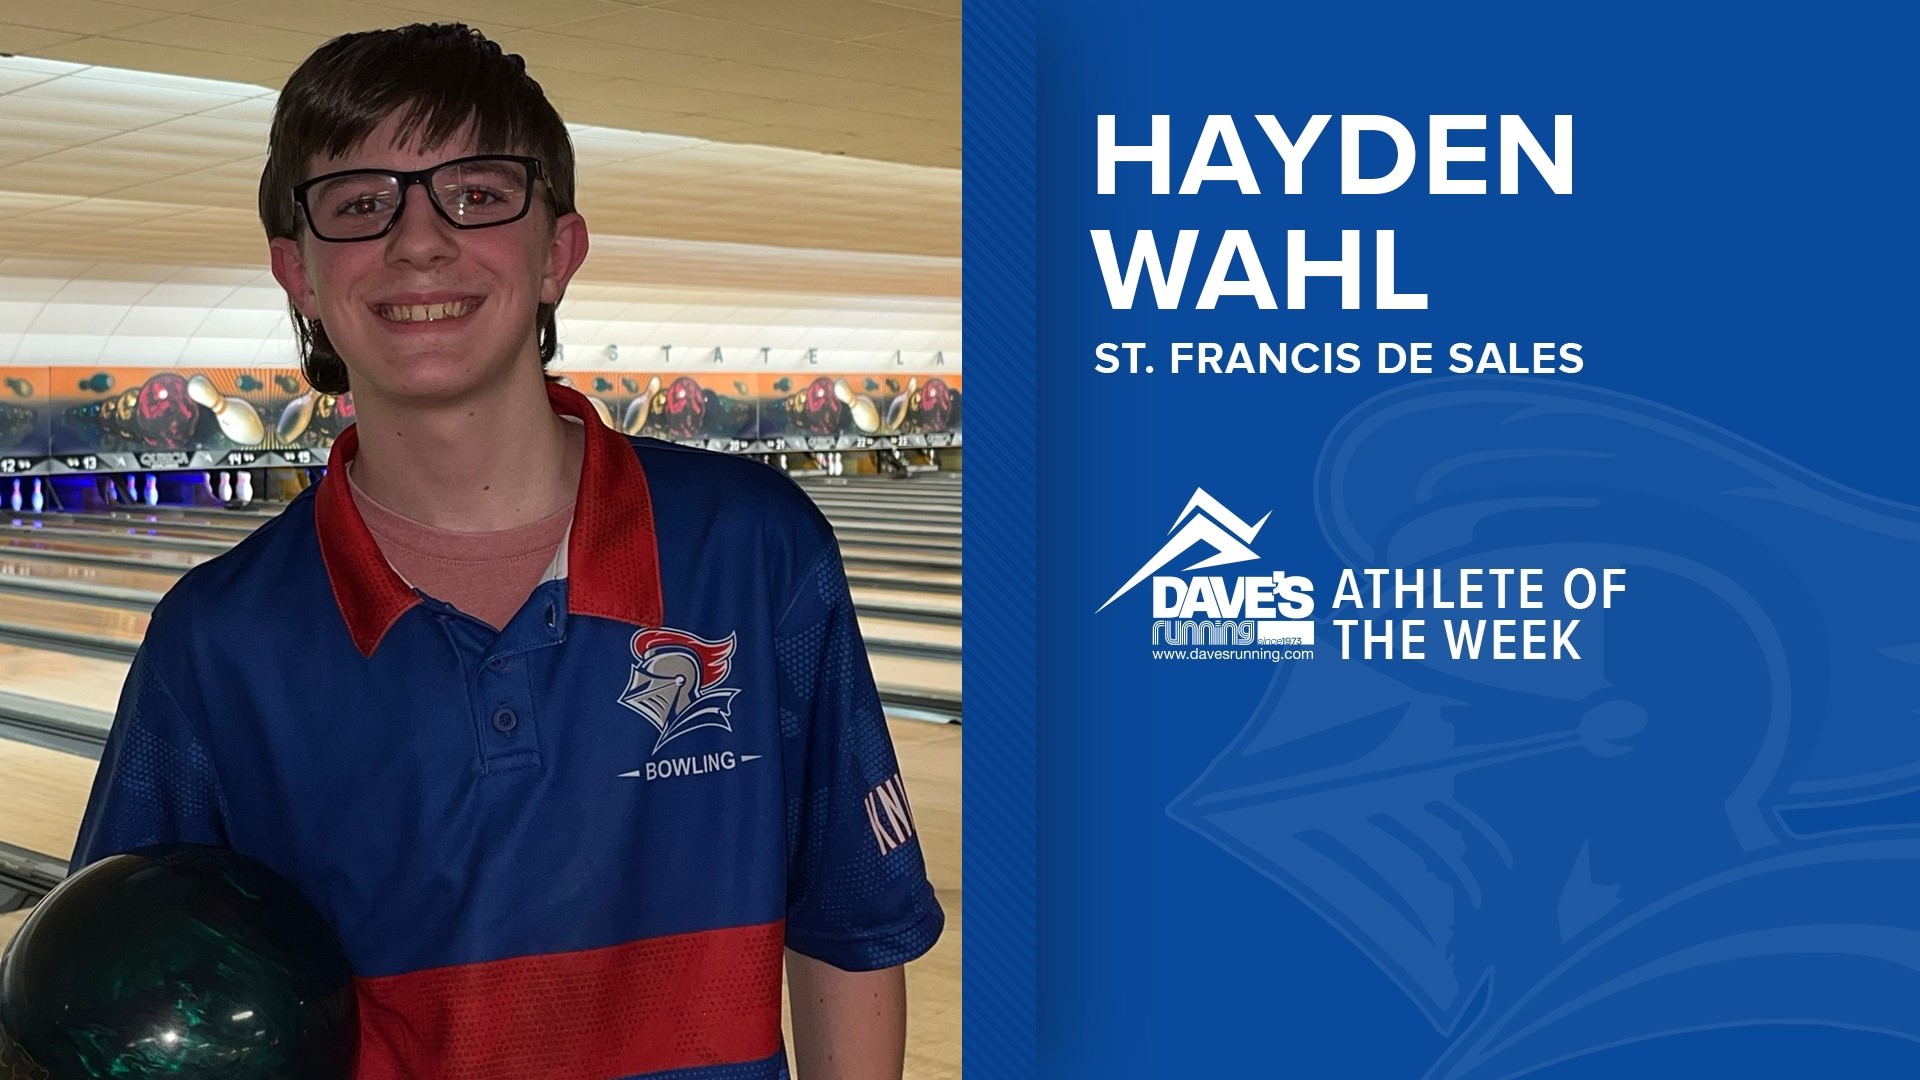 A perfect game is what every bowler dreams to achieve at some point in their career but for 16-year-old Hayden Wahl, that dream became a reality earlier than most.